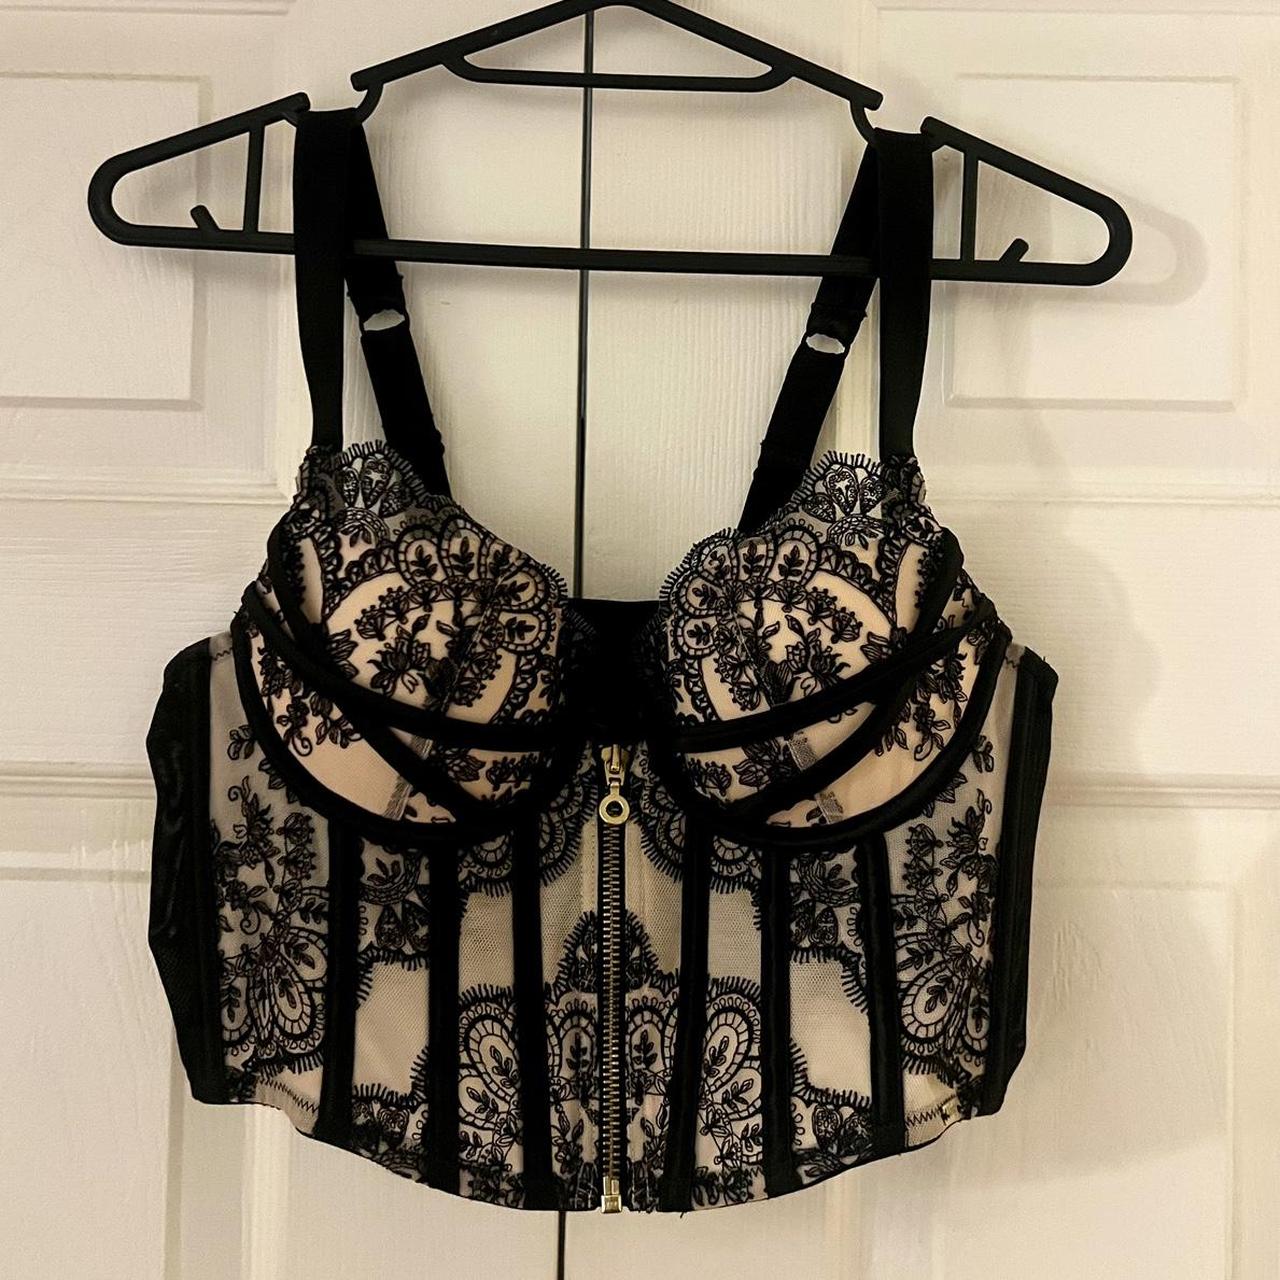 Push-up lace corset bra top size 34B with front - Depop